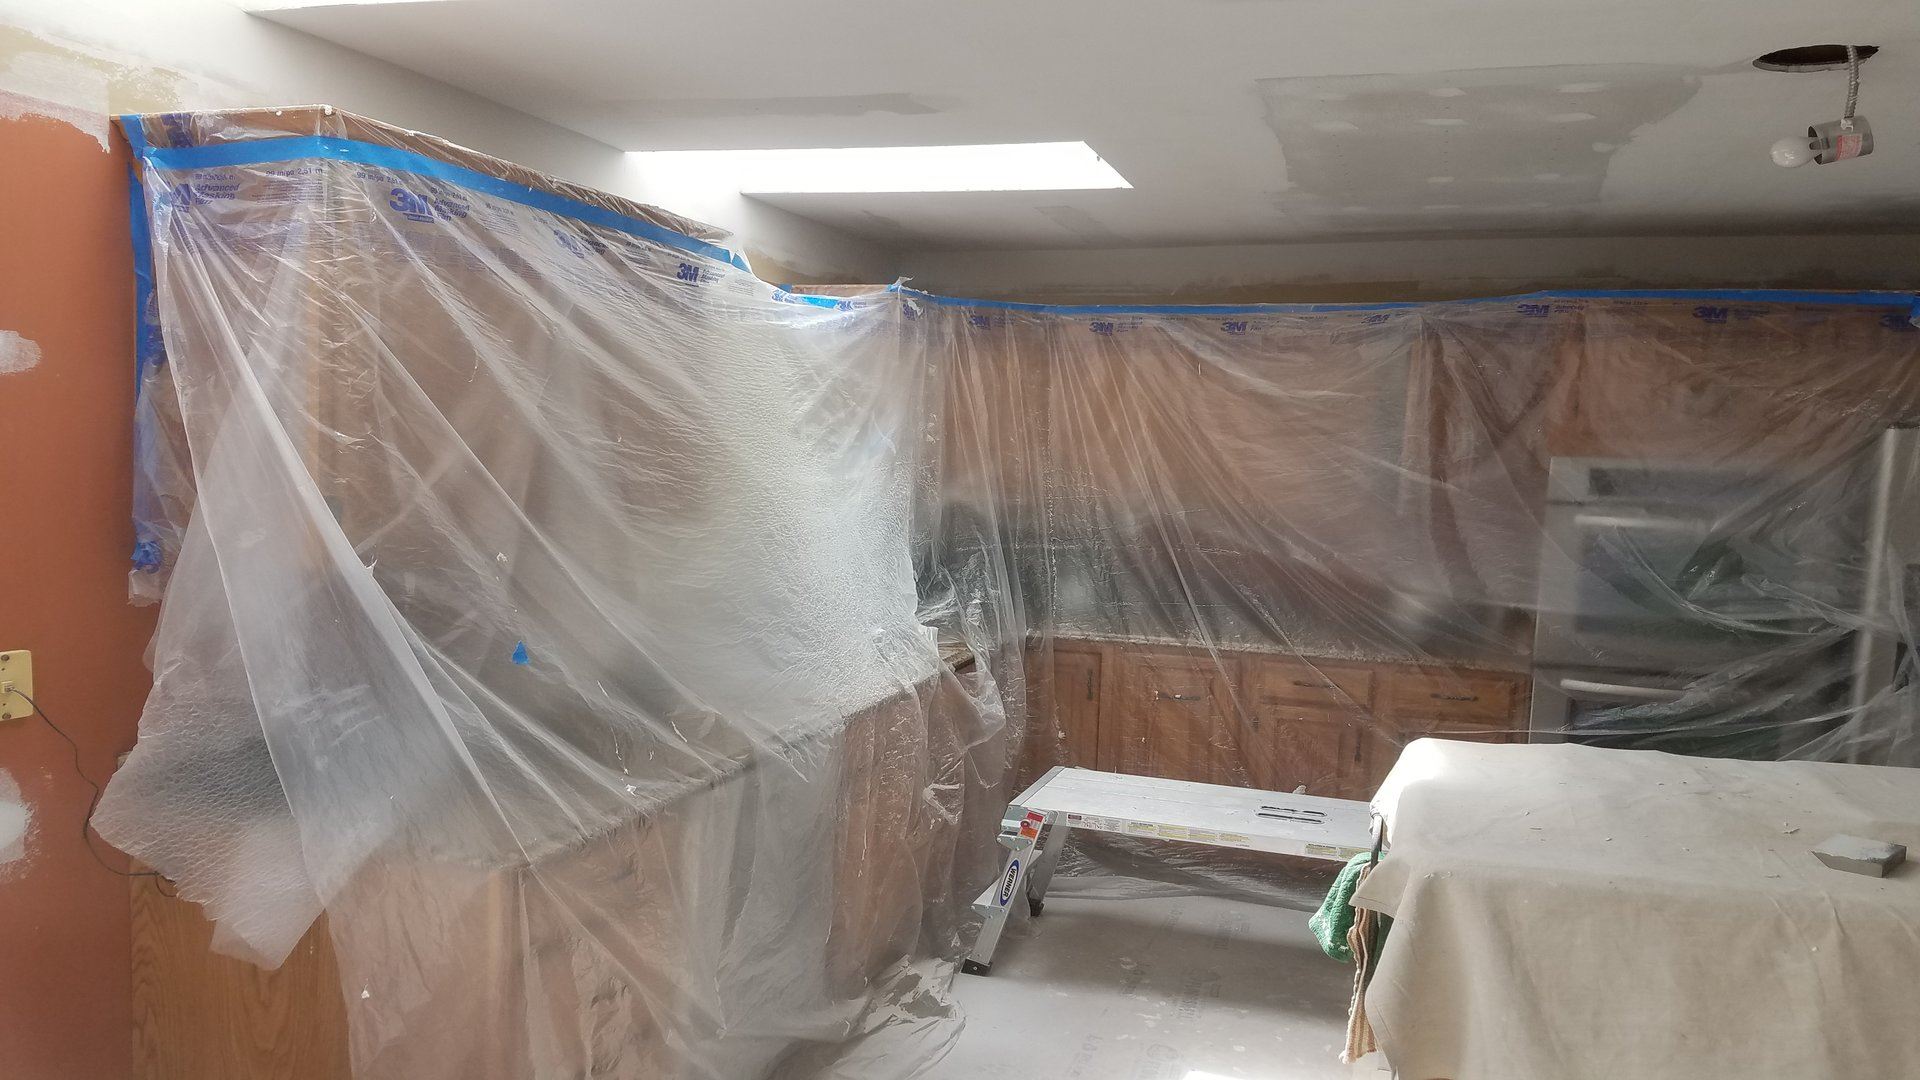 Cabinets covered in protective covering